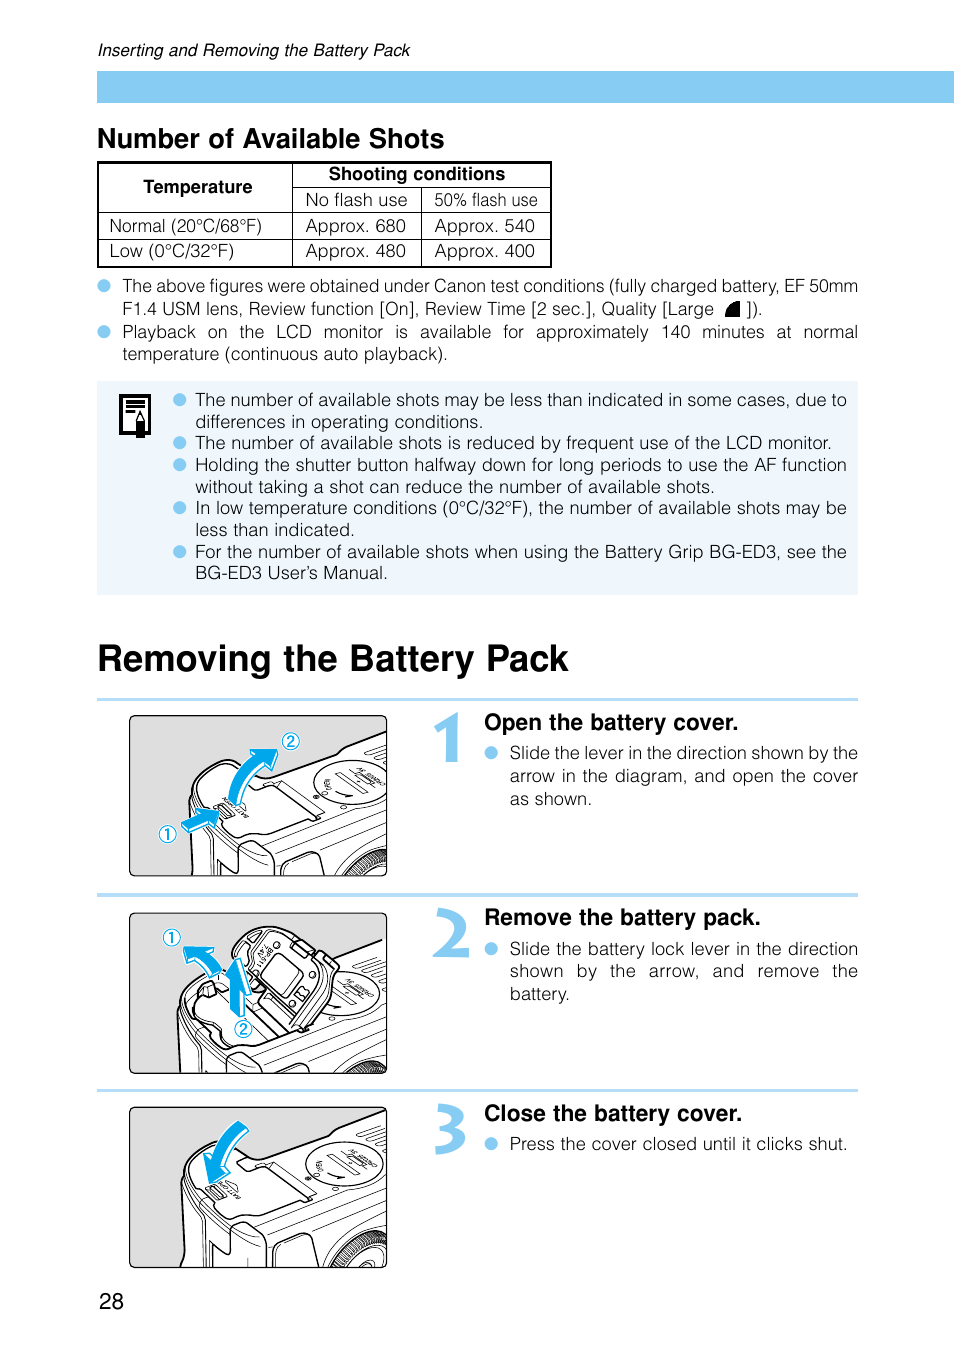 Removing the battery pack, Number of available shots | Canon EOS D30 User Manual | Page 28 / 152